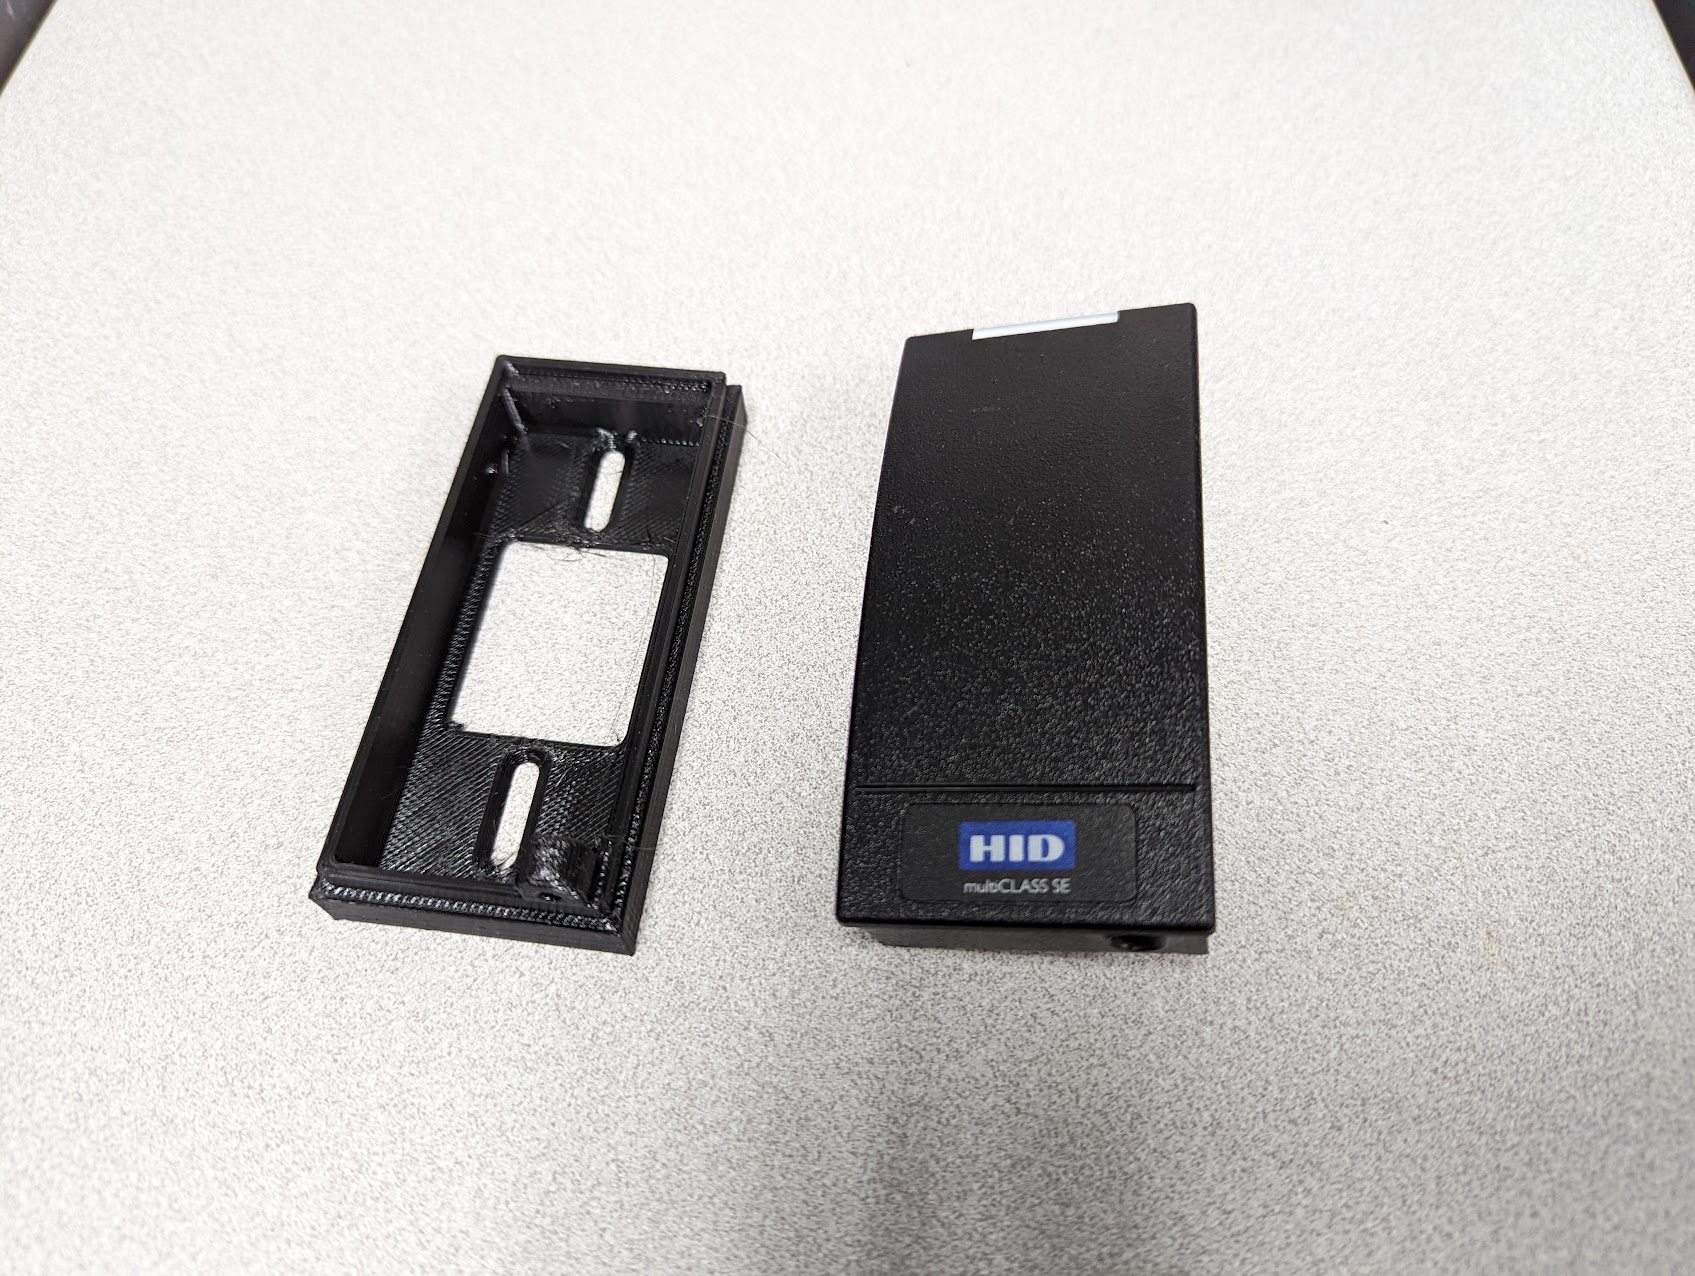 HID 900 Mounting Plate - Extra Deep - 1cm